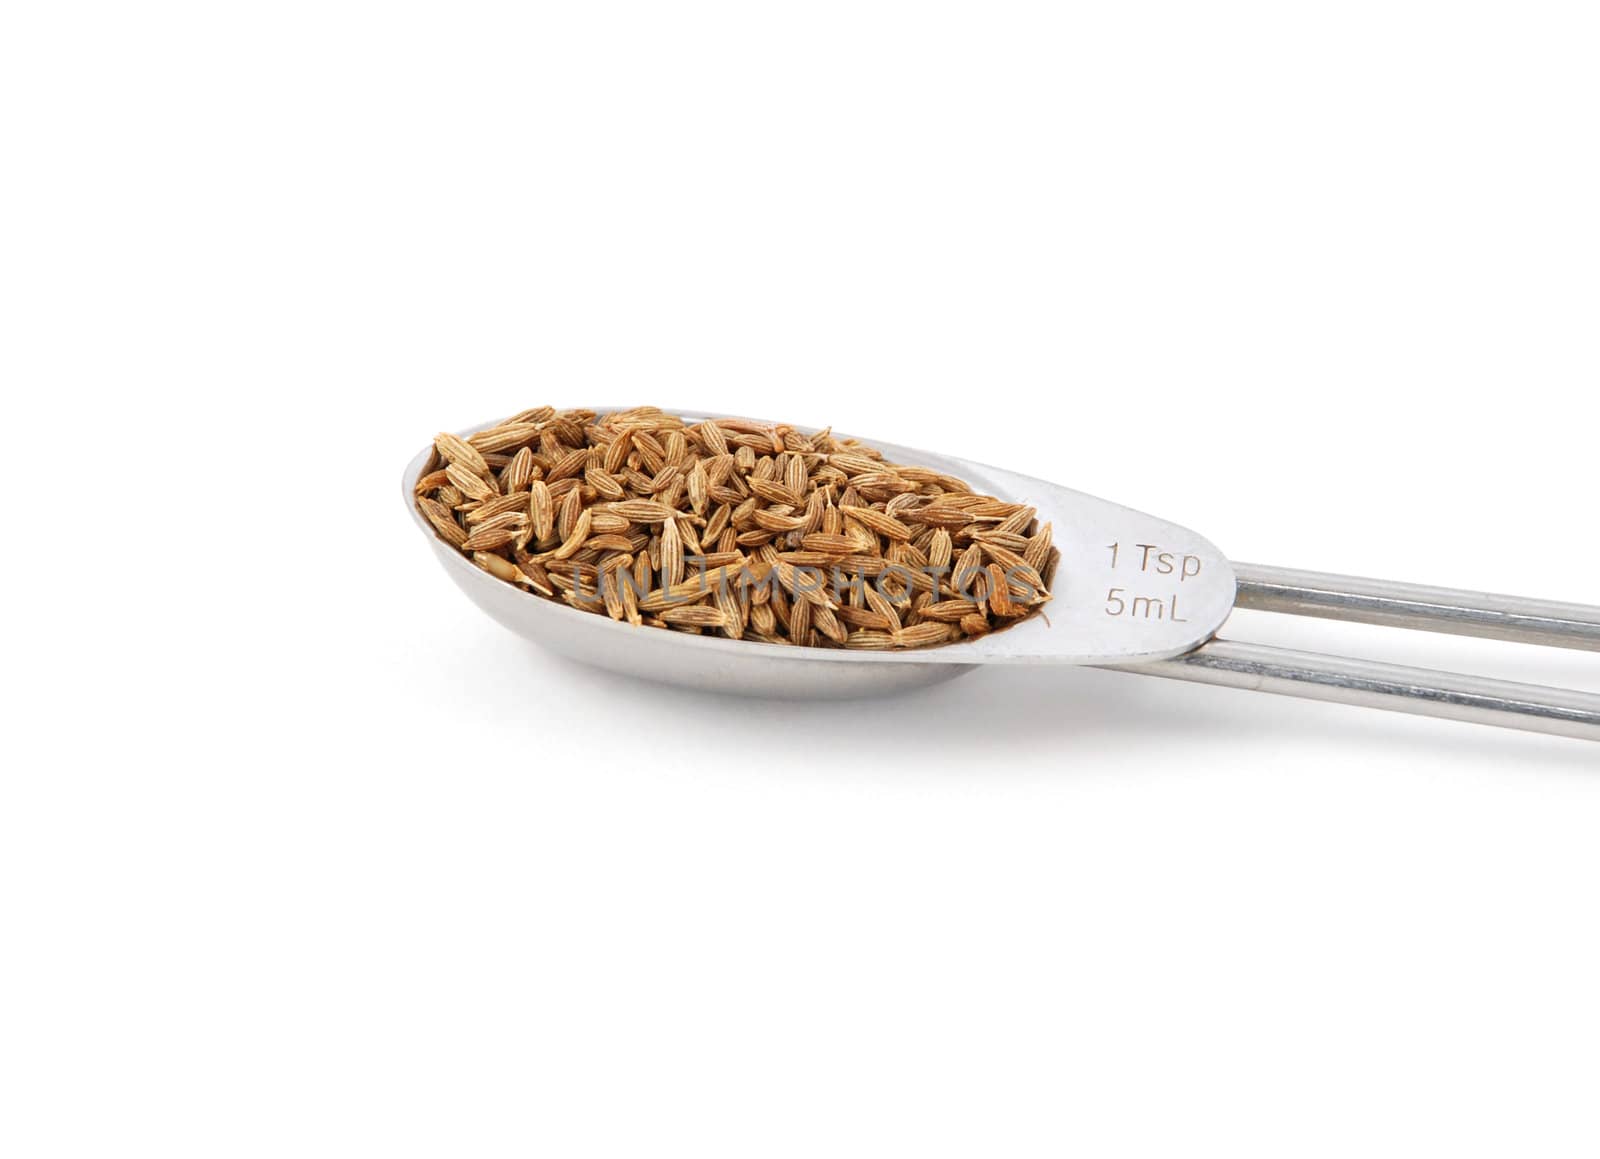 Whole cumin seeds measured in a metal teaspoon, isolated on a white background